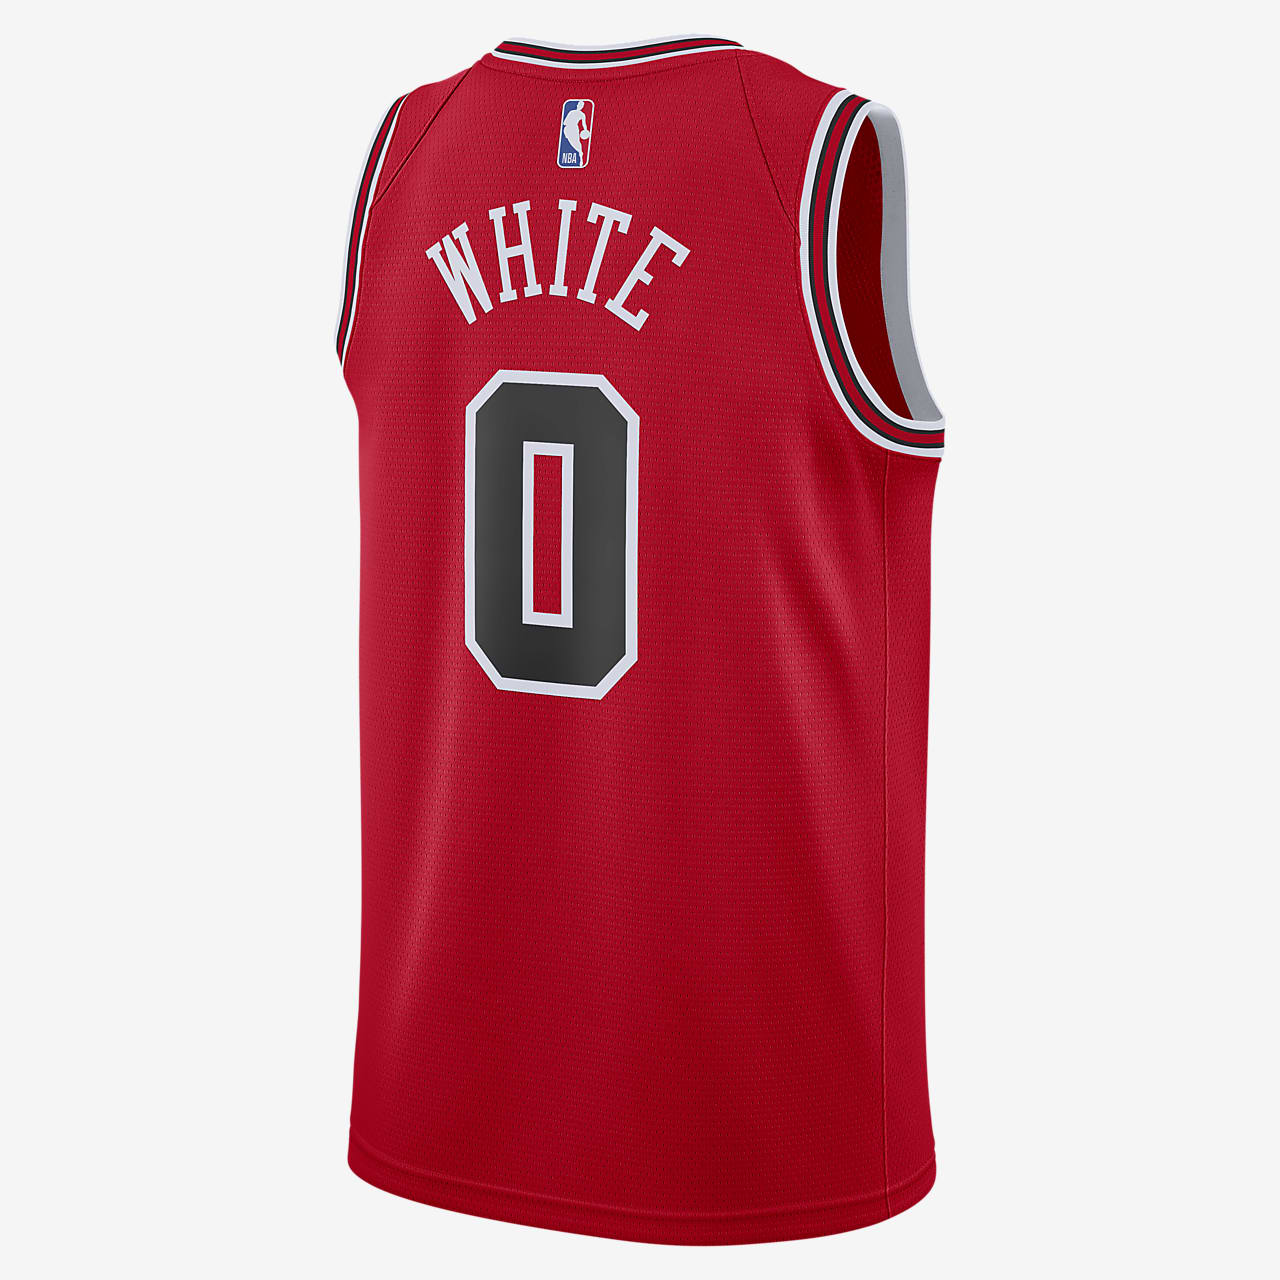 red and white nba jersey